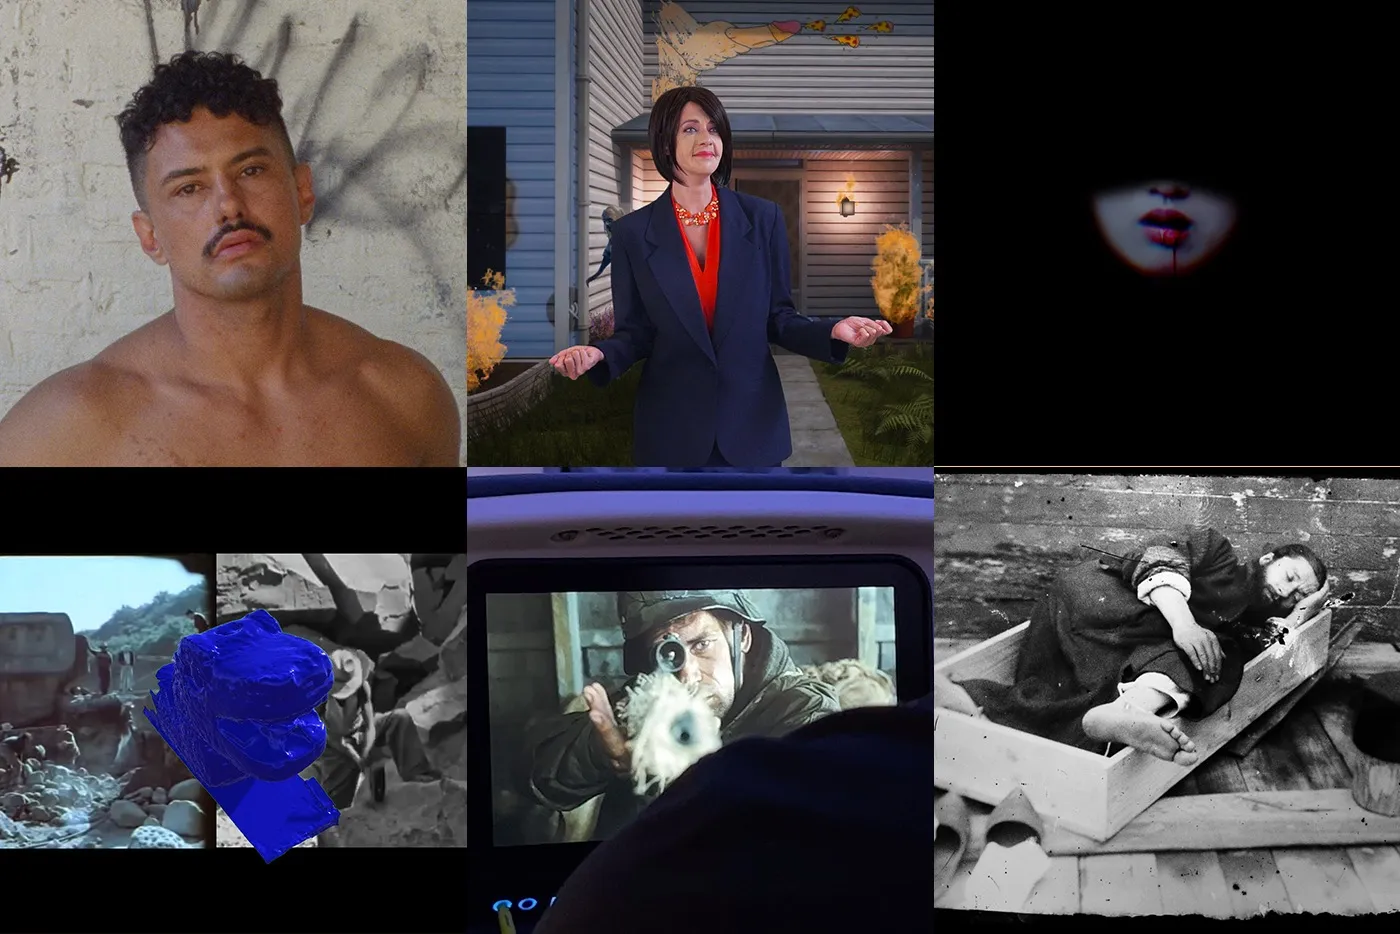 A collection of stills from the Slamdance Experimental Shorts Block